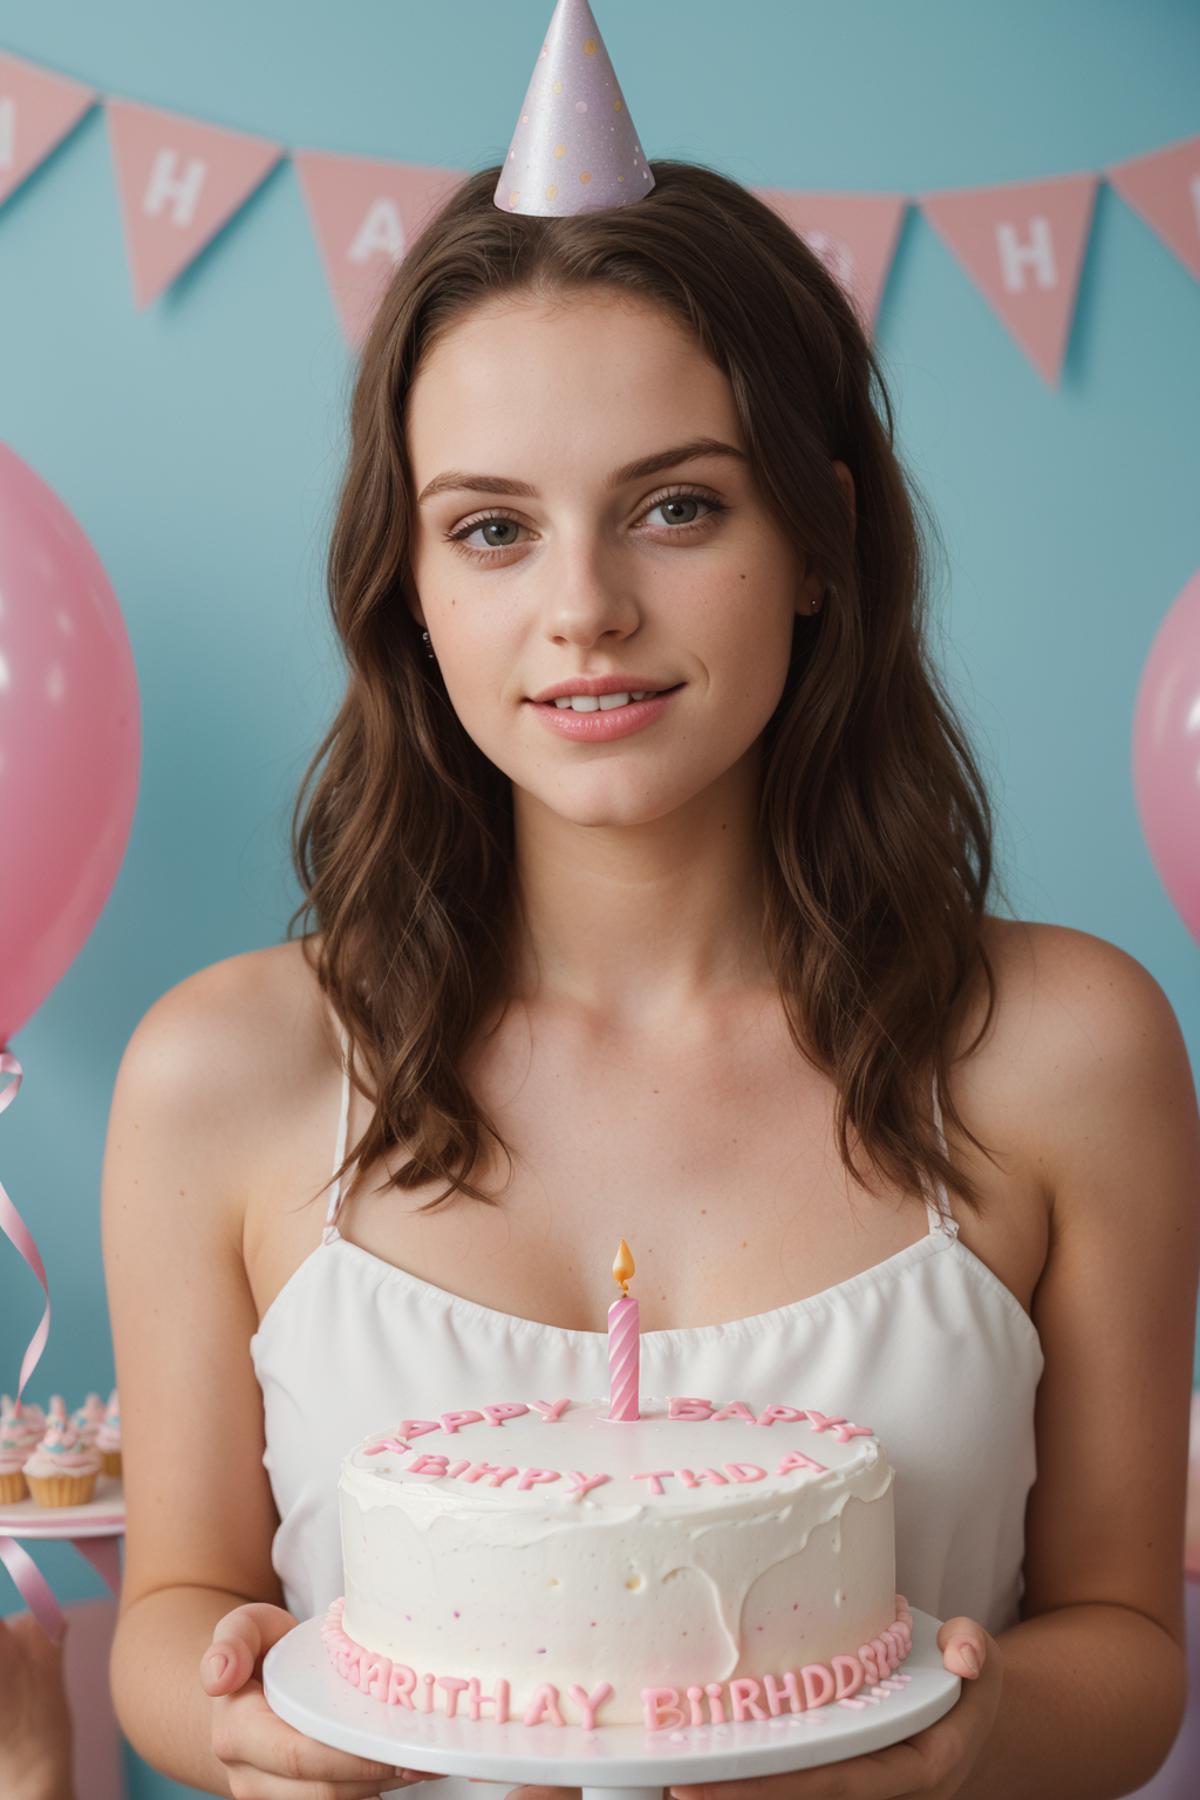 A woman is wearing a white dress and blowing out candles on her birthday cake.